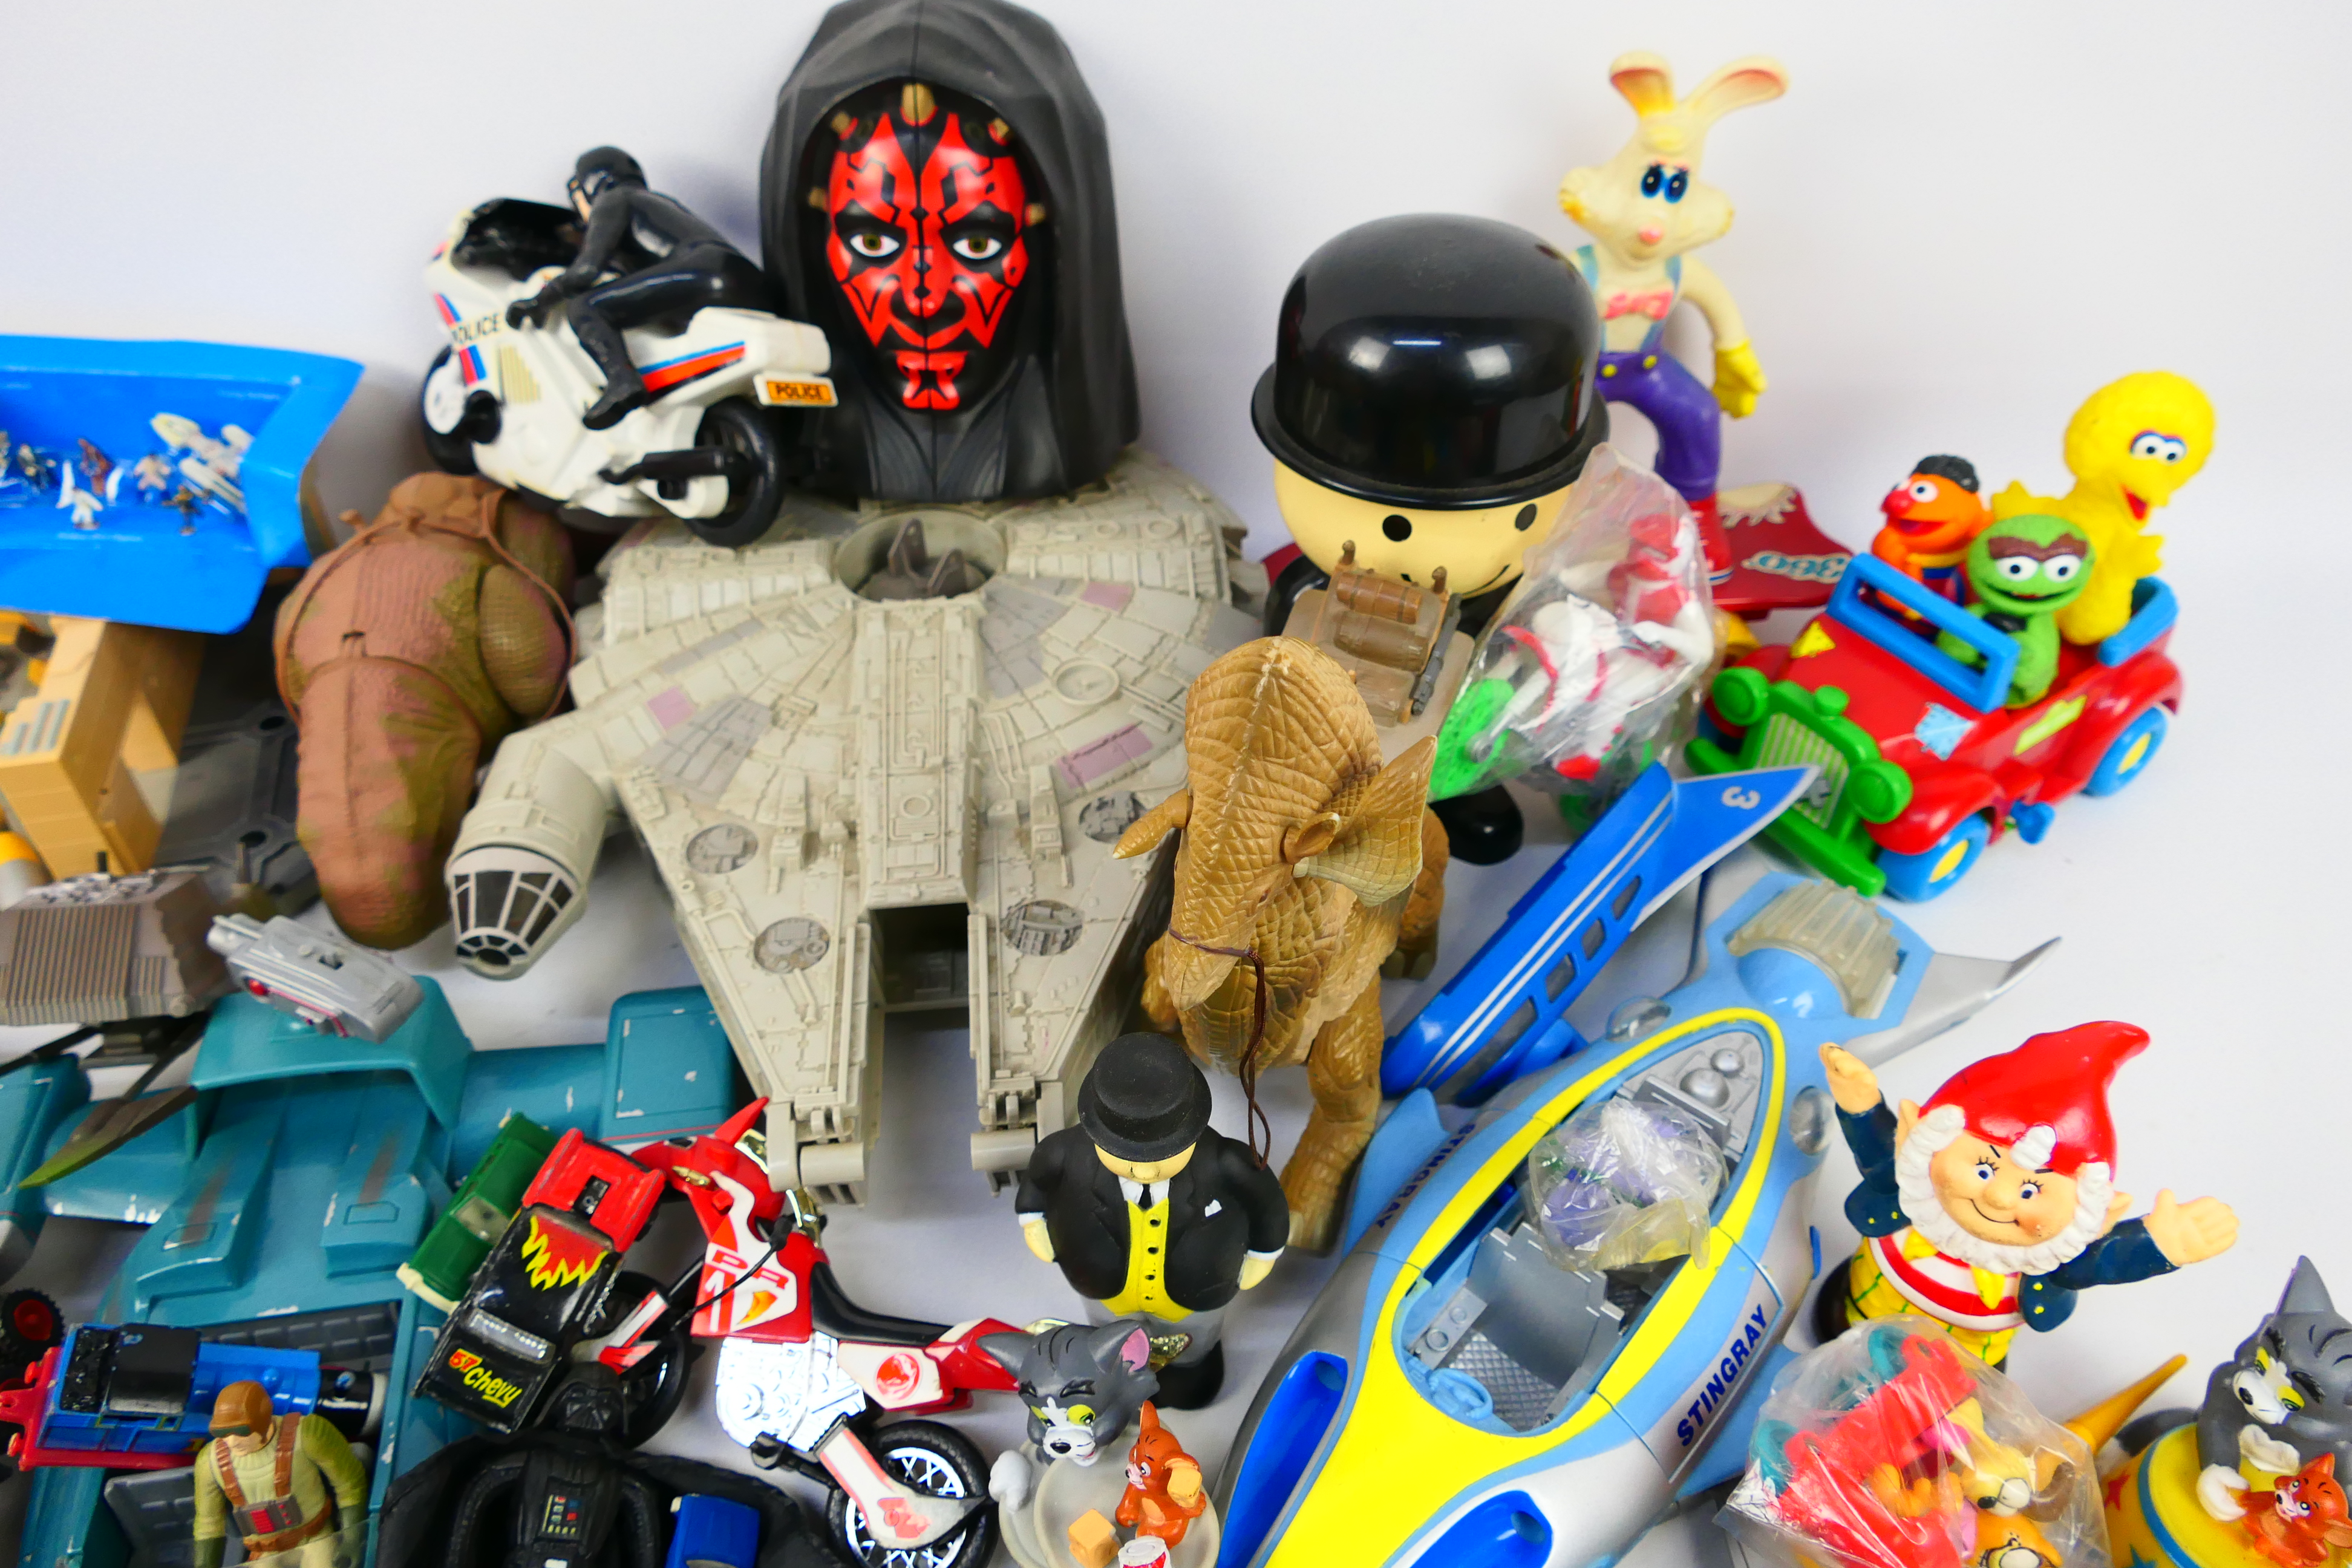 Kenner - Hasbro - Galoob - Tyco - Others - An assortment of unboxed vintage action figures and toys. - Image 7 of 7